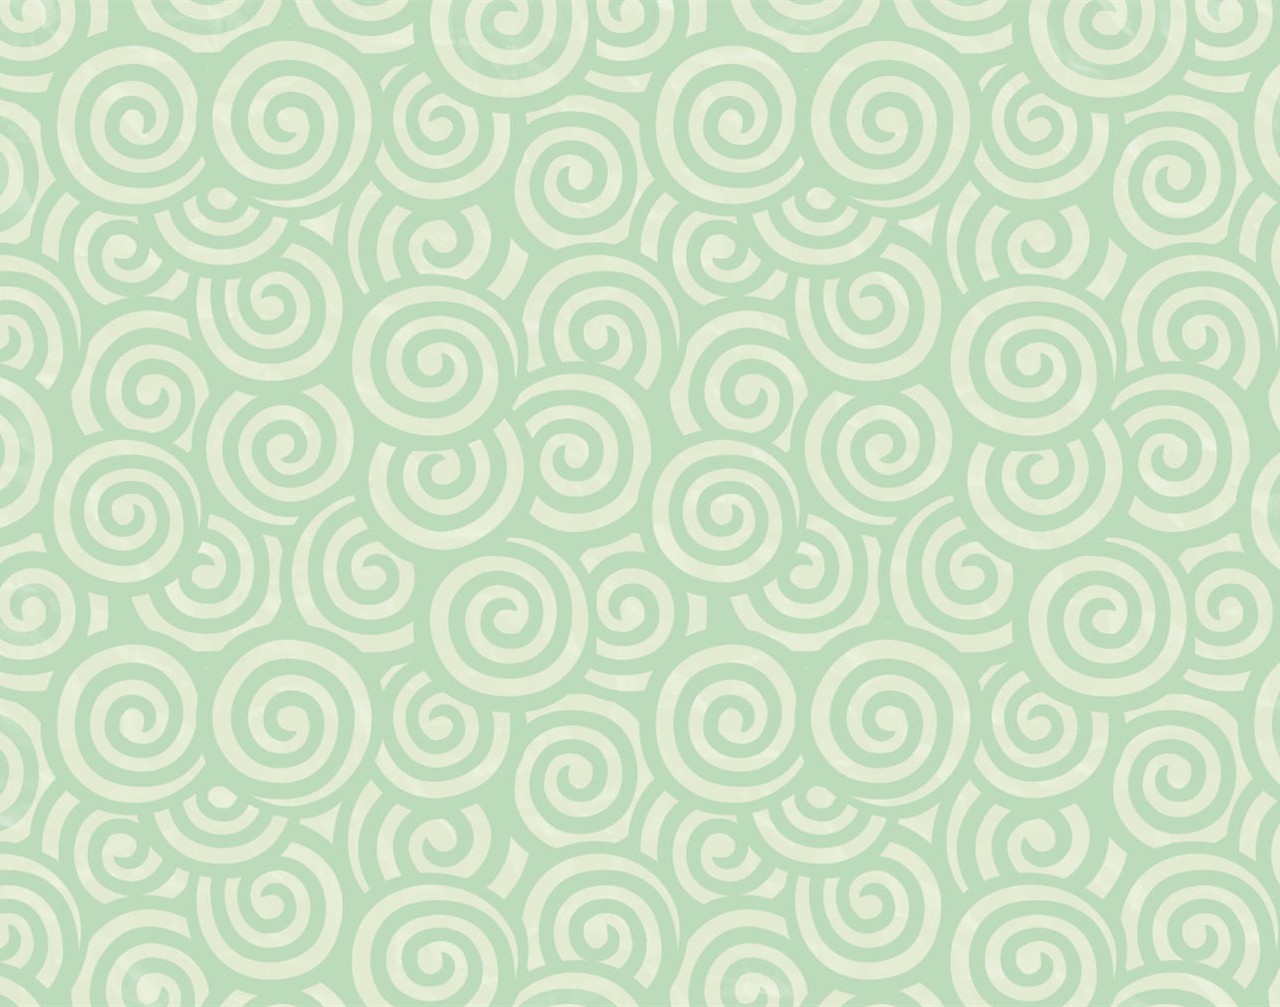 Circles soft green Backgrounds